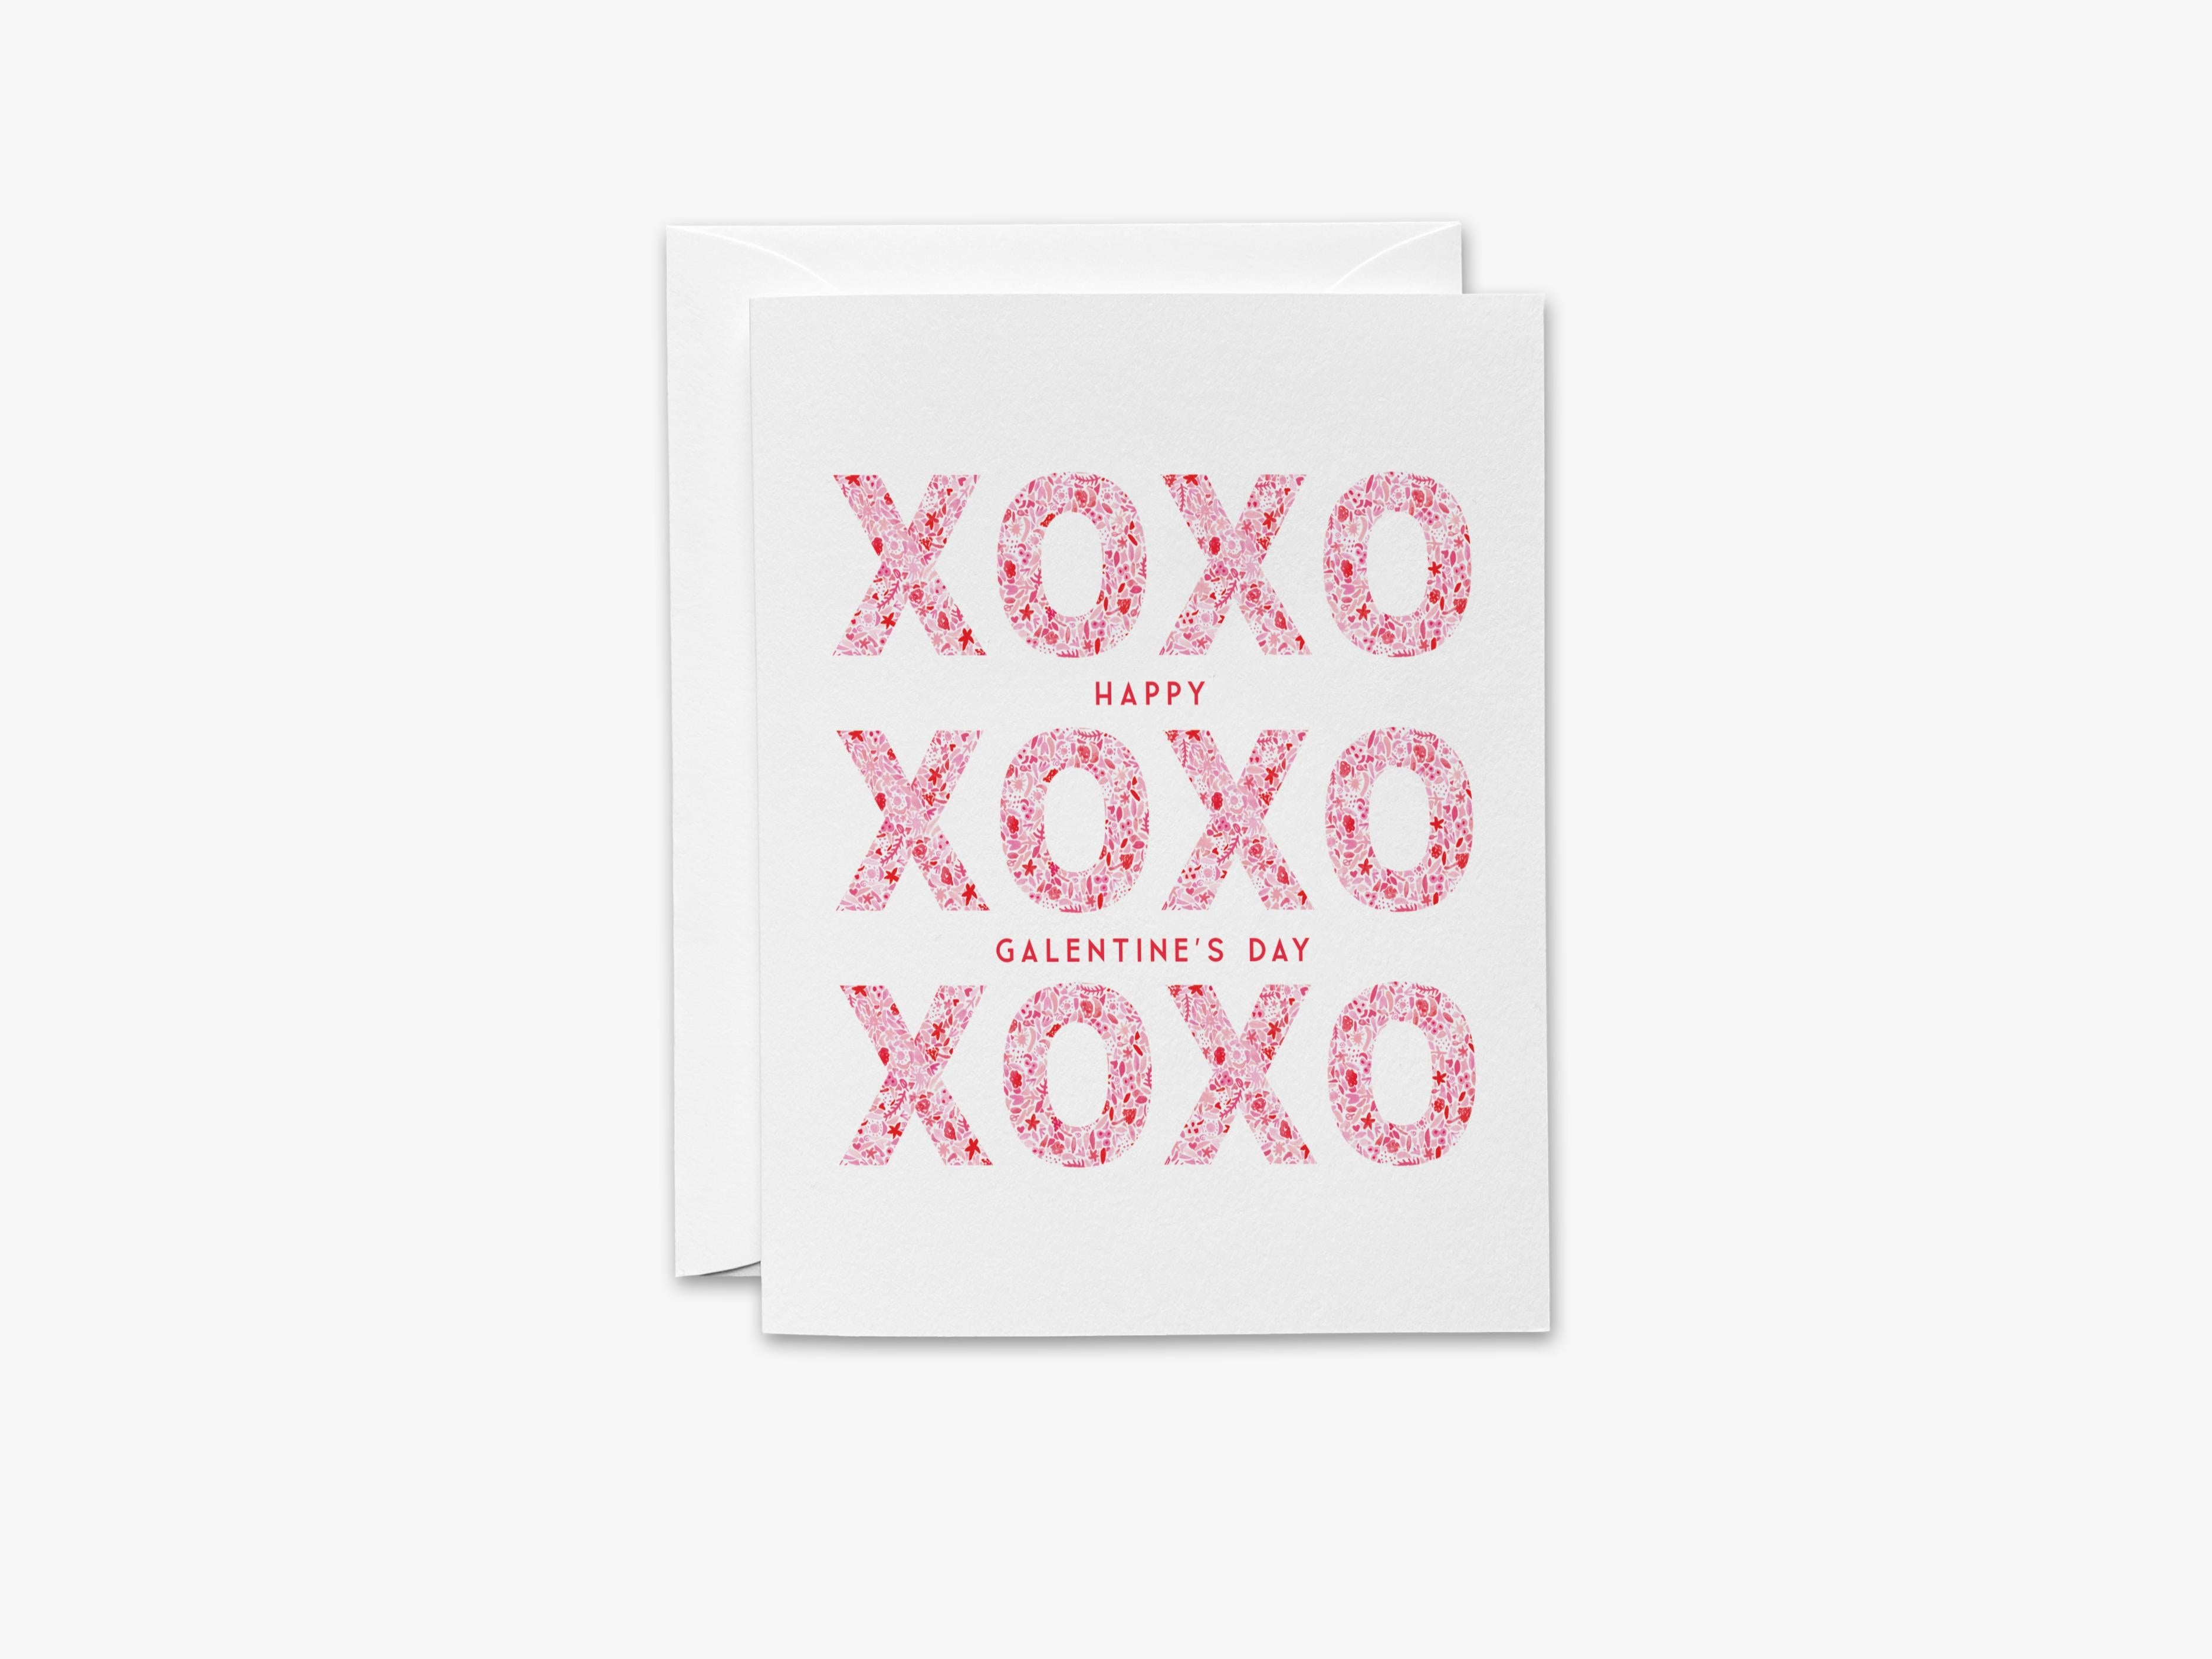 Galentine's XOXO Greeting Card-These folded greeting cards are 4.25x5.5 and feature our hand-painted pink and red pattern xoxo, printed in the USA on 100lb textured stock. They come with a White envelope and make a great Galentine's Day card for the gal pal in your life.-The Singing Little Bird